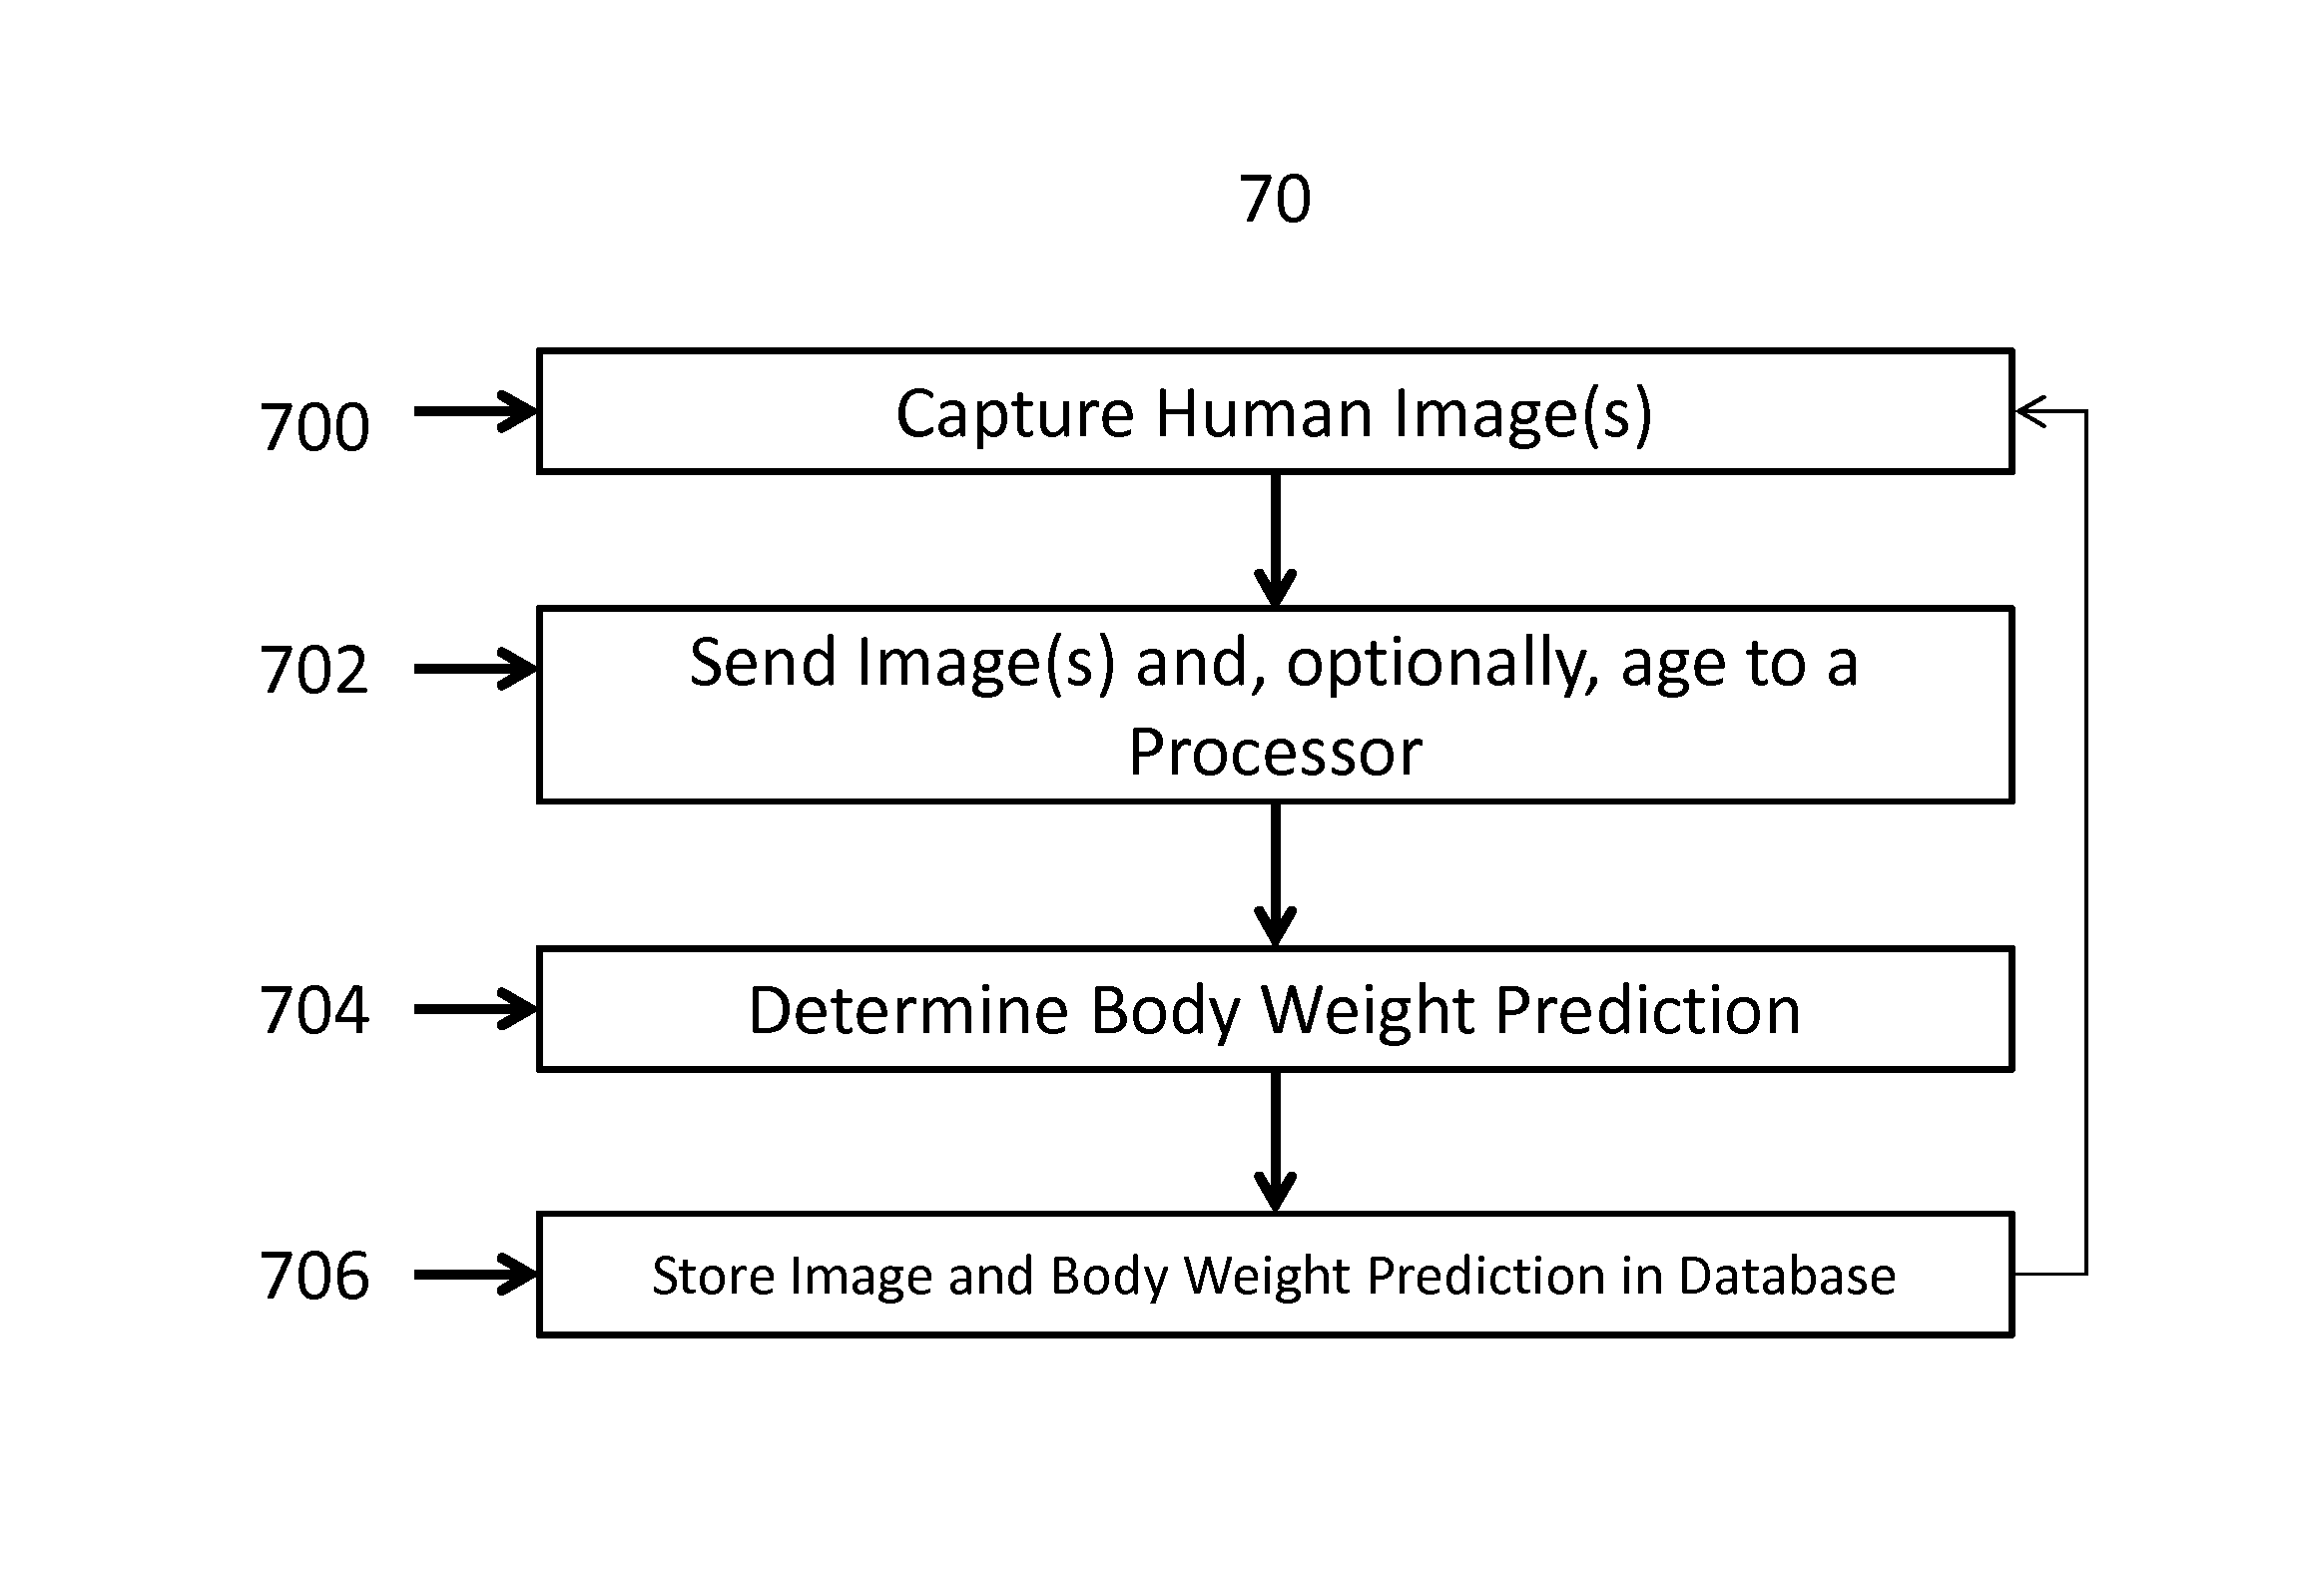 Image analysis for predicting body weight in humans